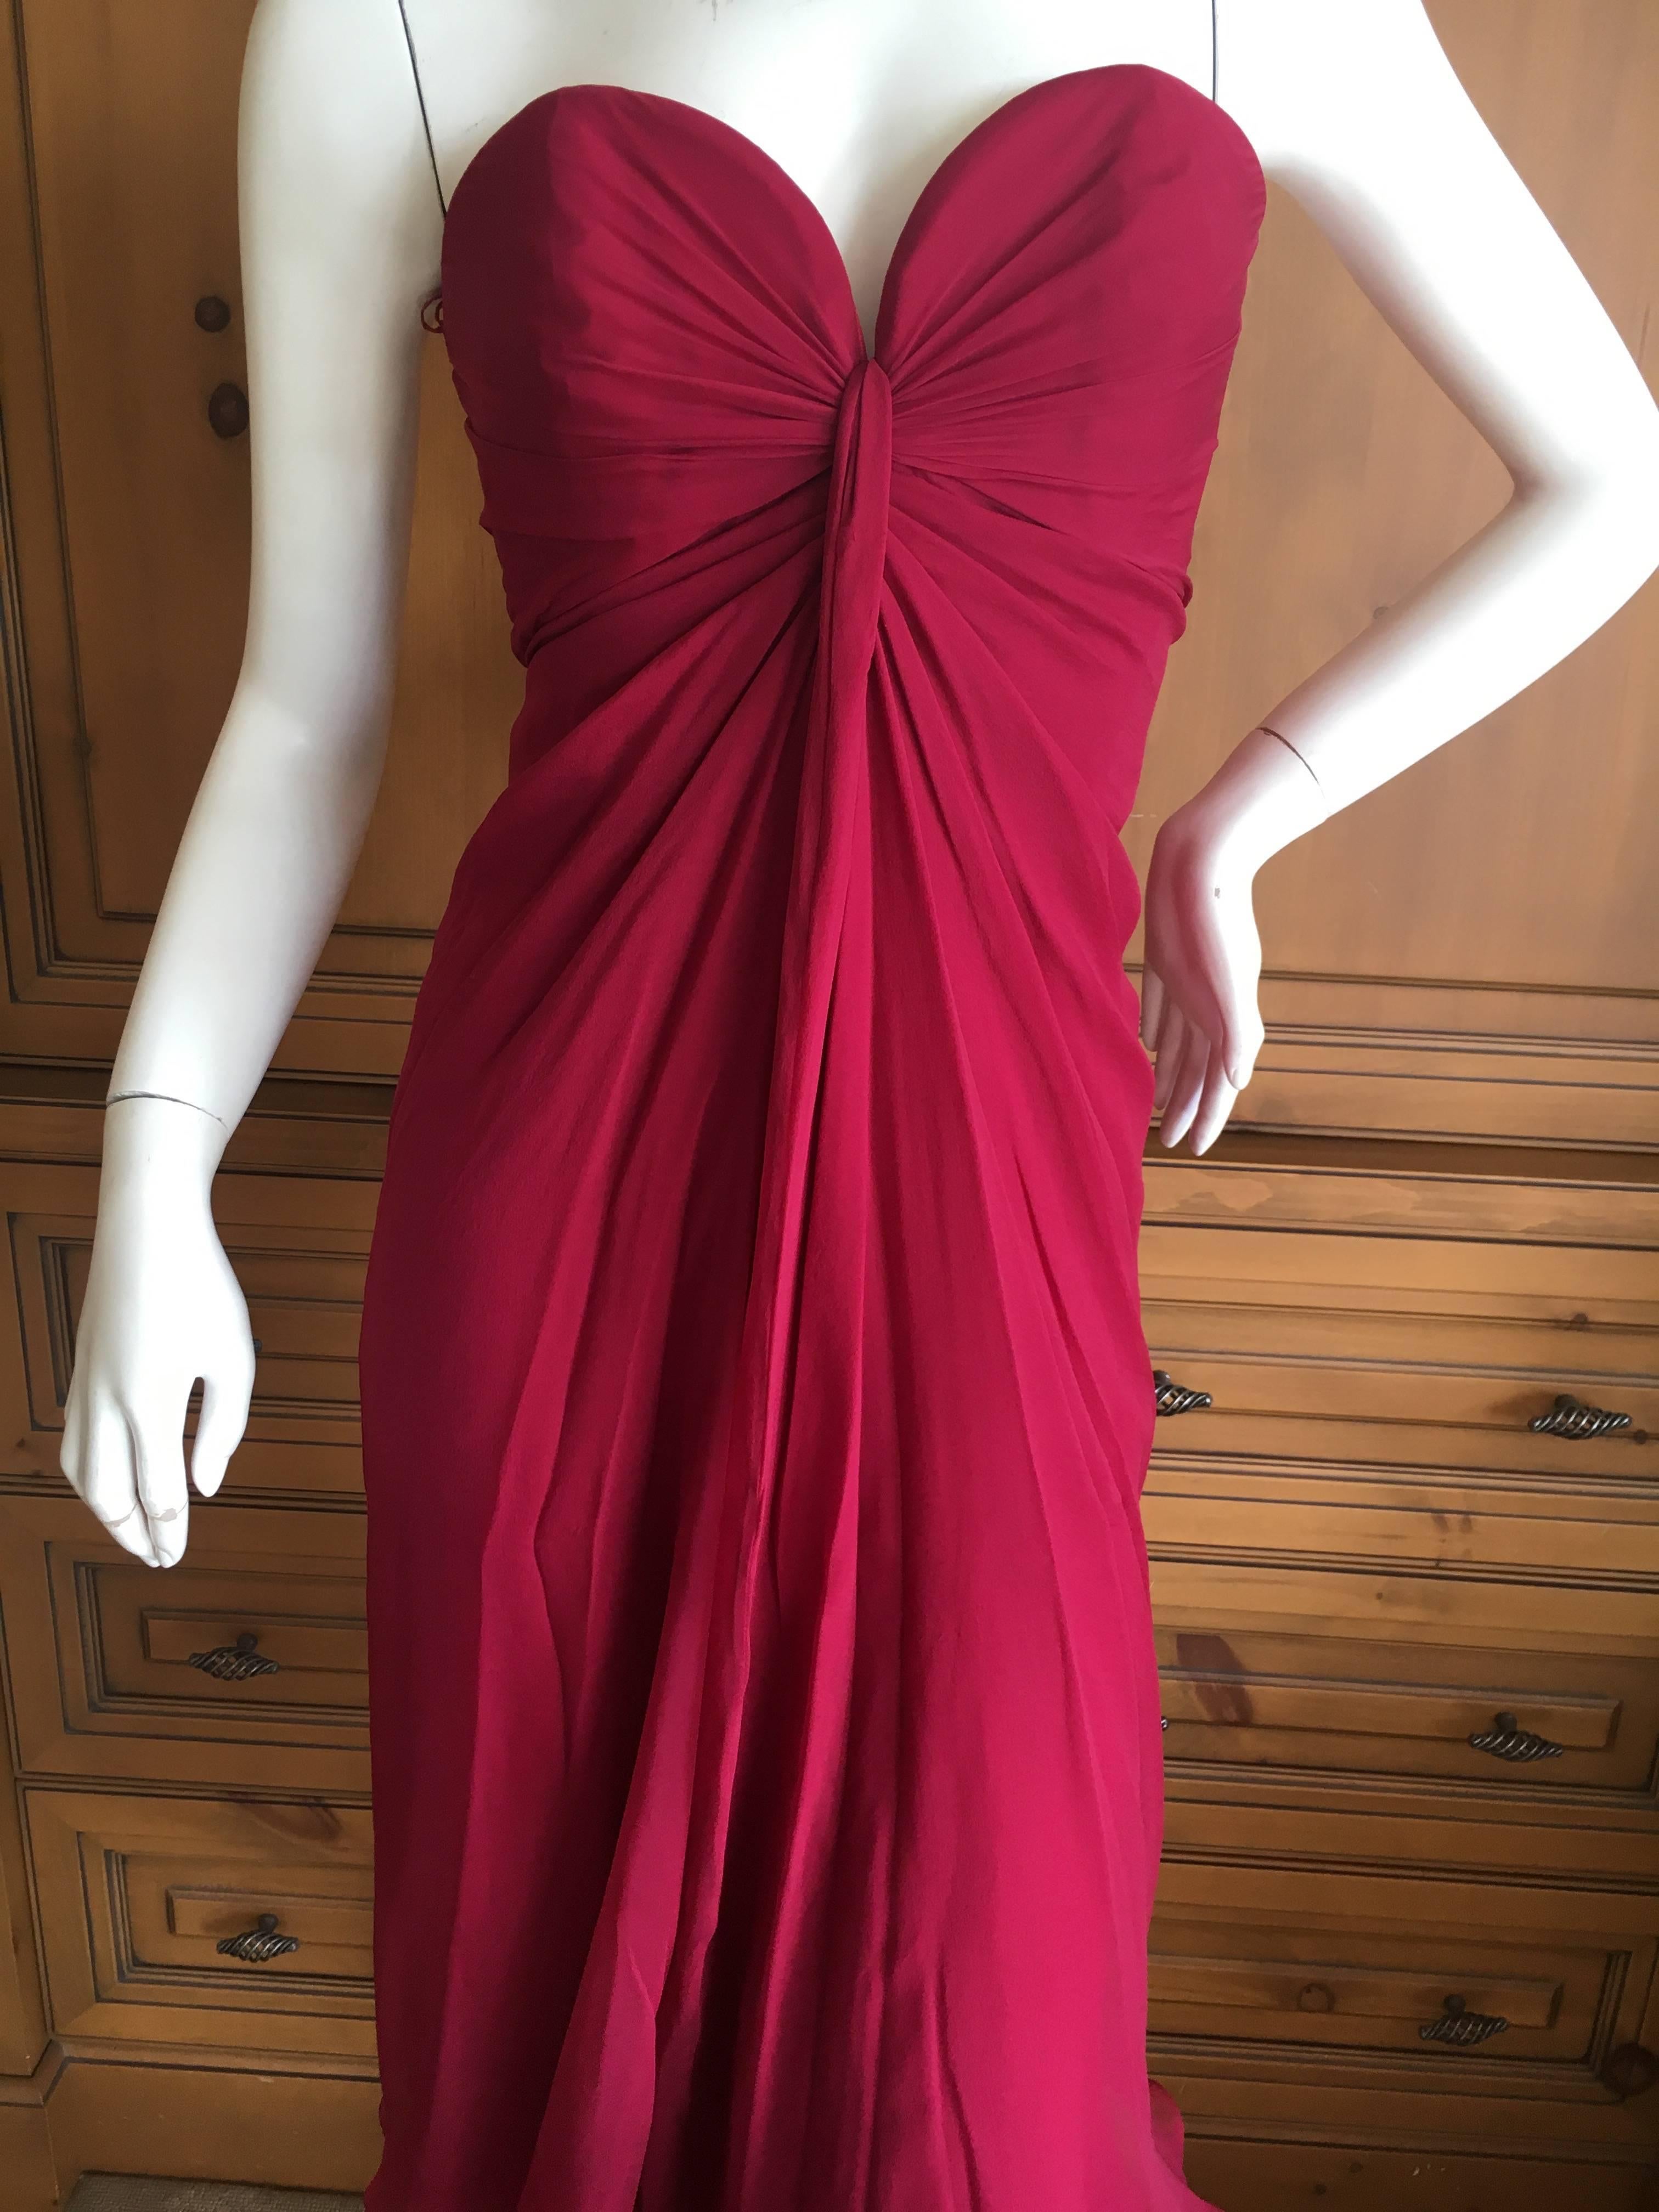 Yves Saint Laurent Red Silk Strapless Cocktail Dress.
There is a boned inner corset.
Size 40
Bust 38